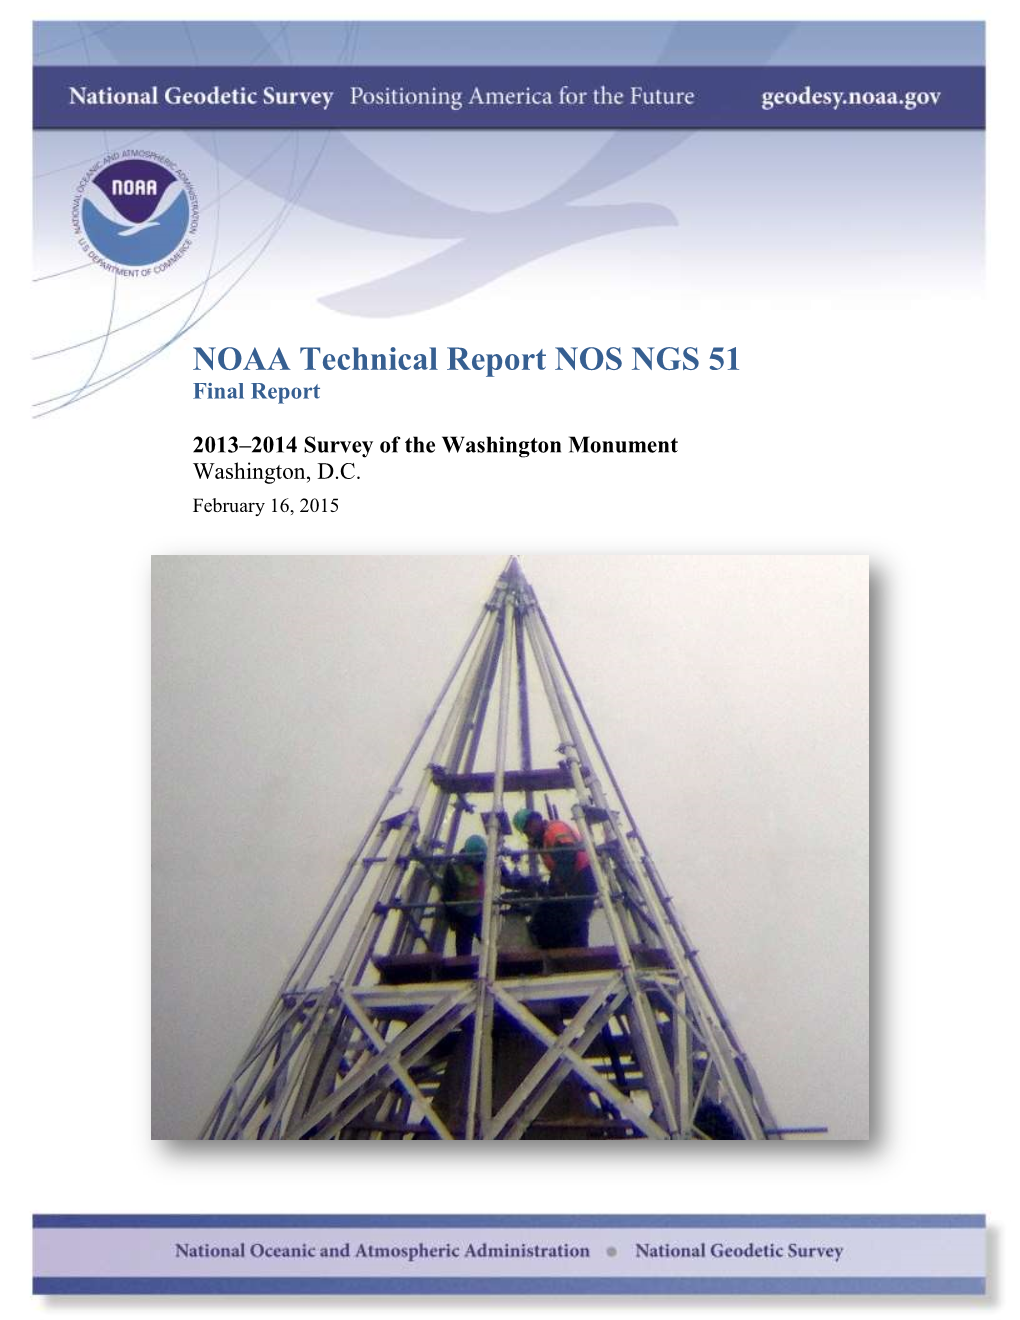 NOAA Technical Report NOS NGS 51